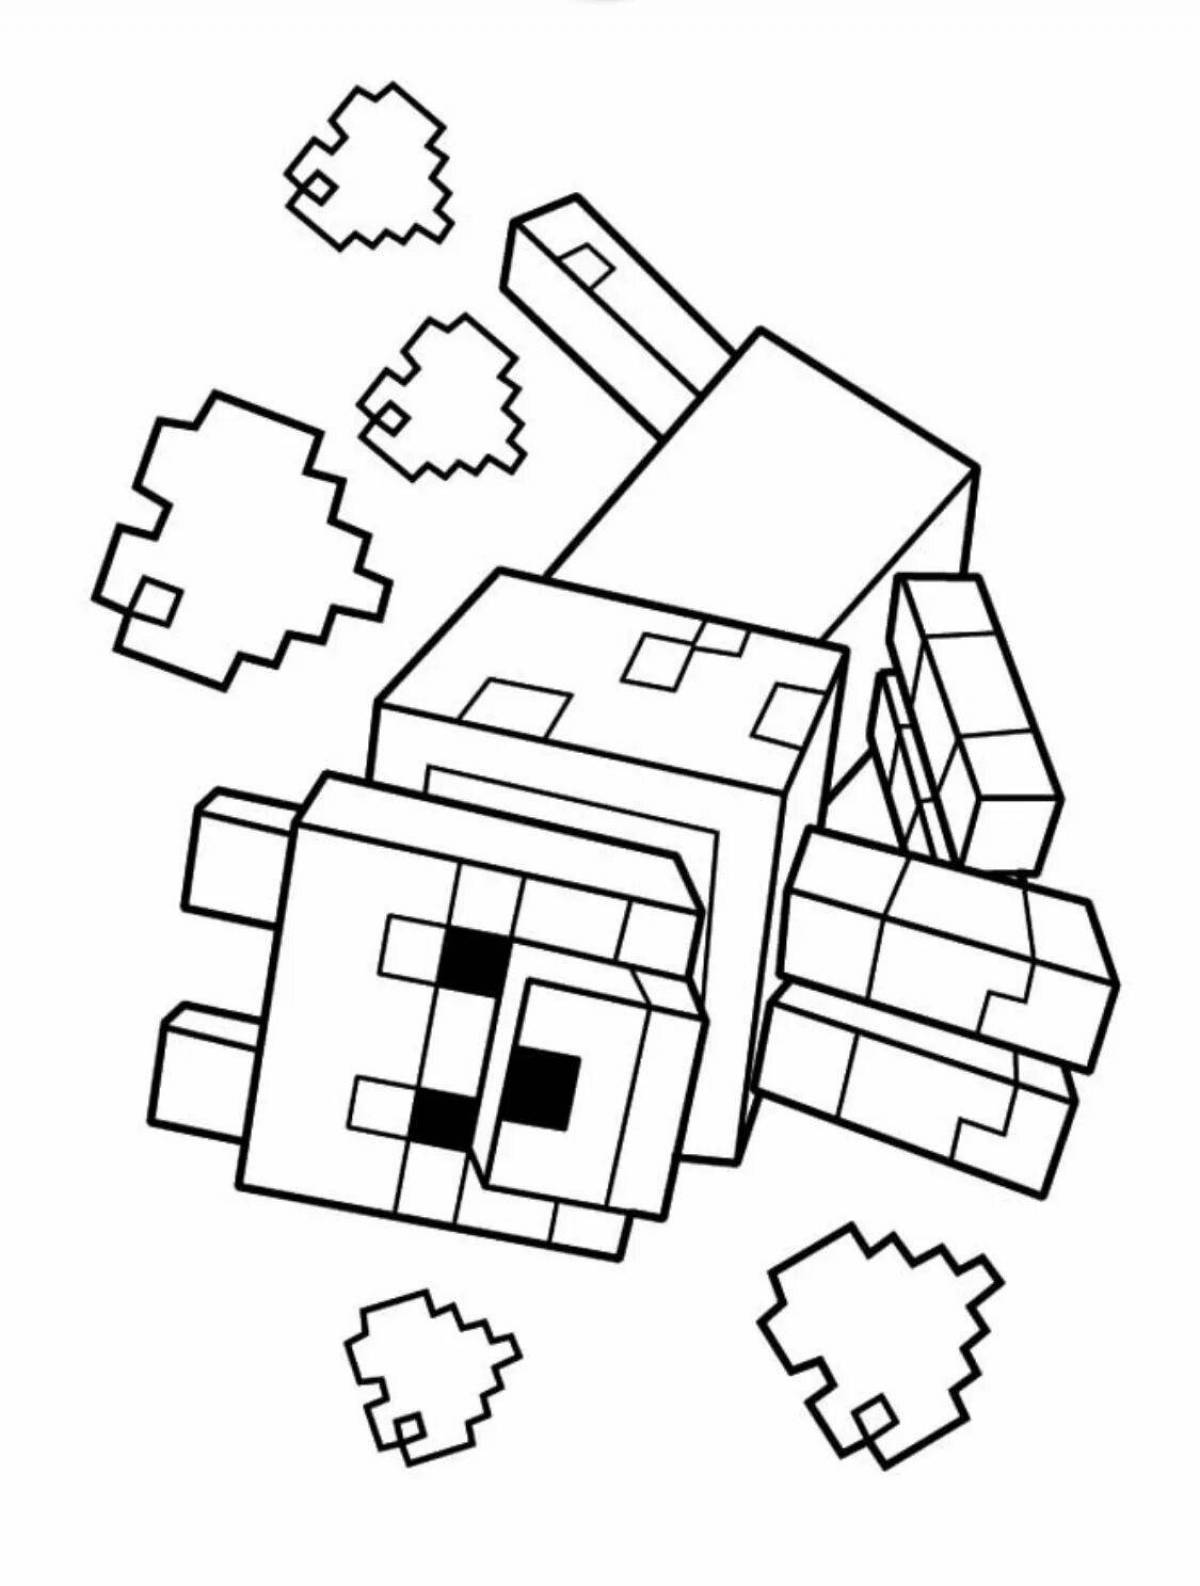 Colorful coloring page for minecraft villagers